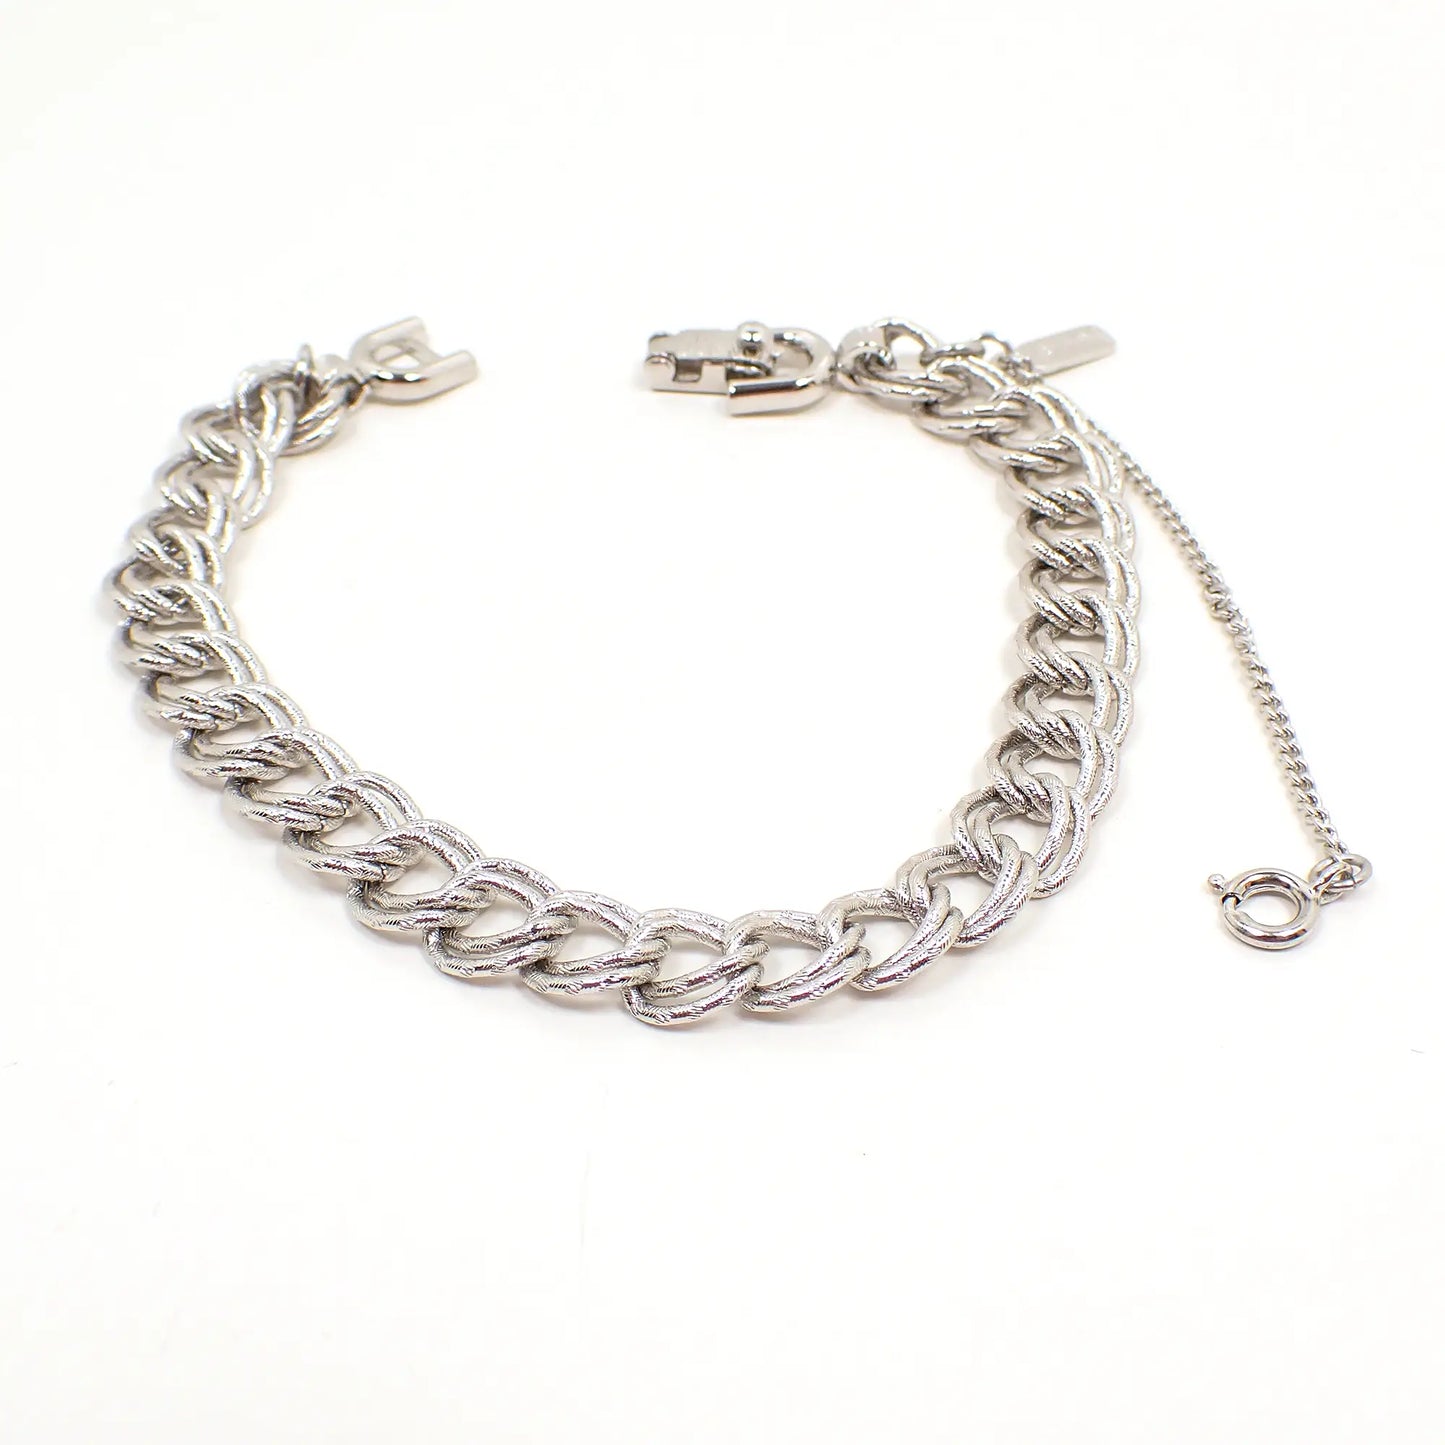 1960's Monet Mid Century Vintage Double Link Chain Bracelet with Safety Chain